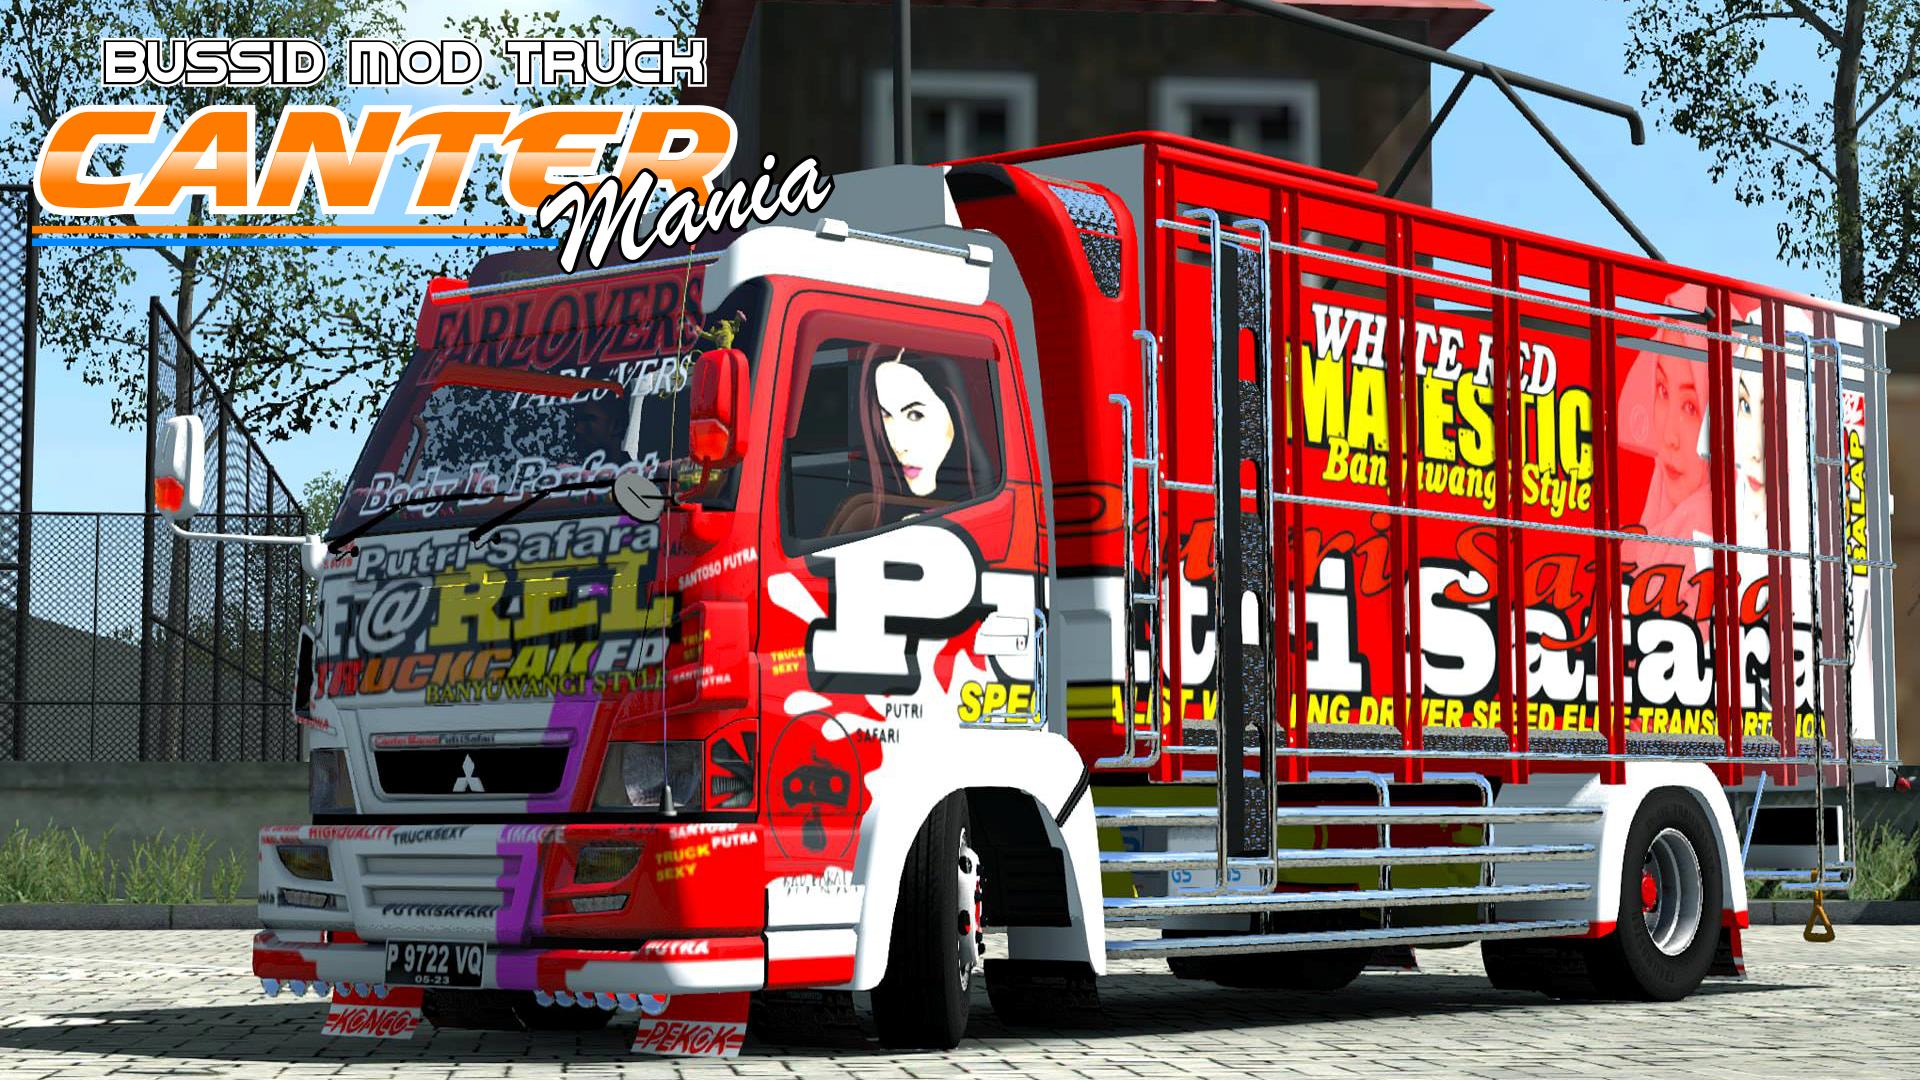 Mod-Bussid-Truck-Canter-Livery